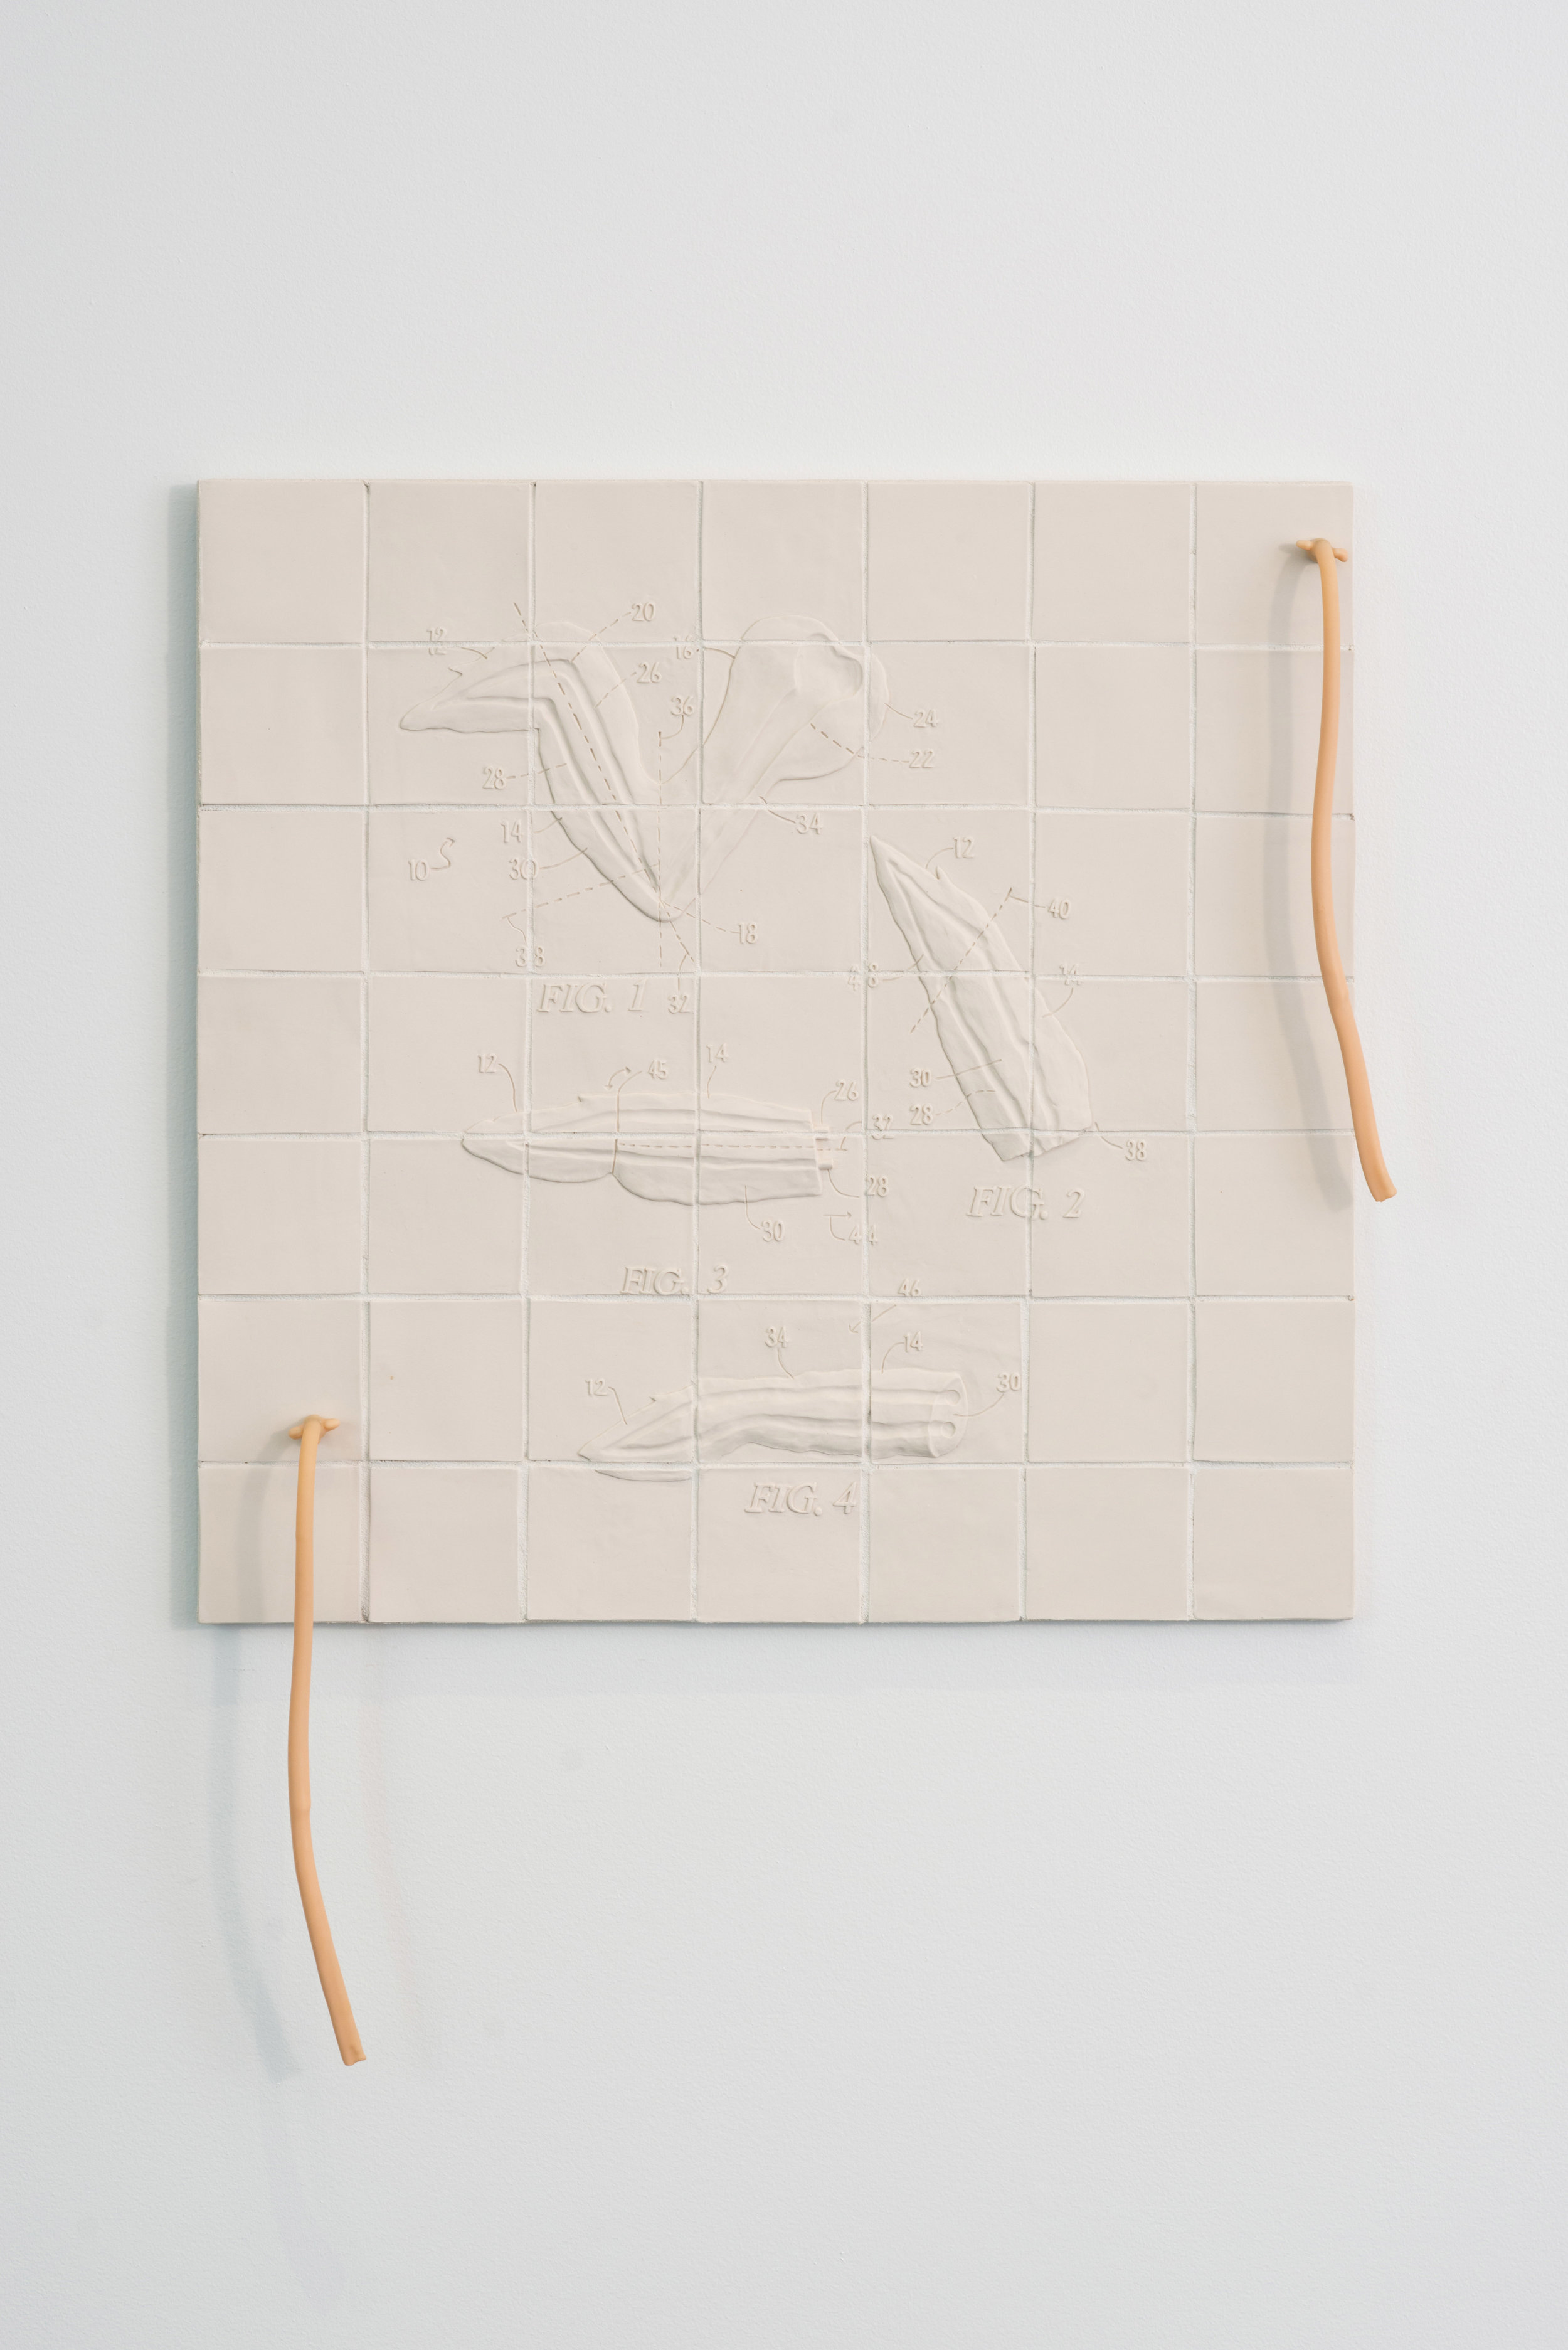   Flats and Rounds  2018 Porcelain, Grout, Hardware, Latex tubing, Silicone 31”H x 31”W x 3”D  Photograph courtesy of MCA Denver   